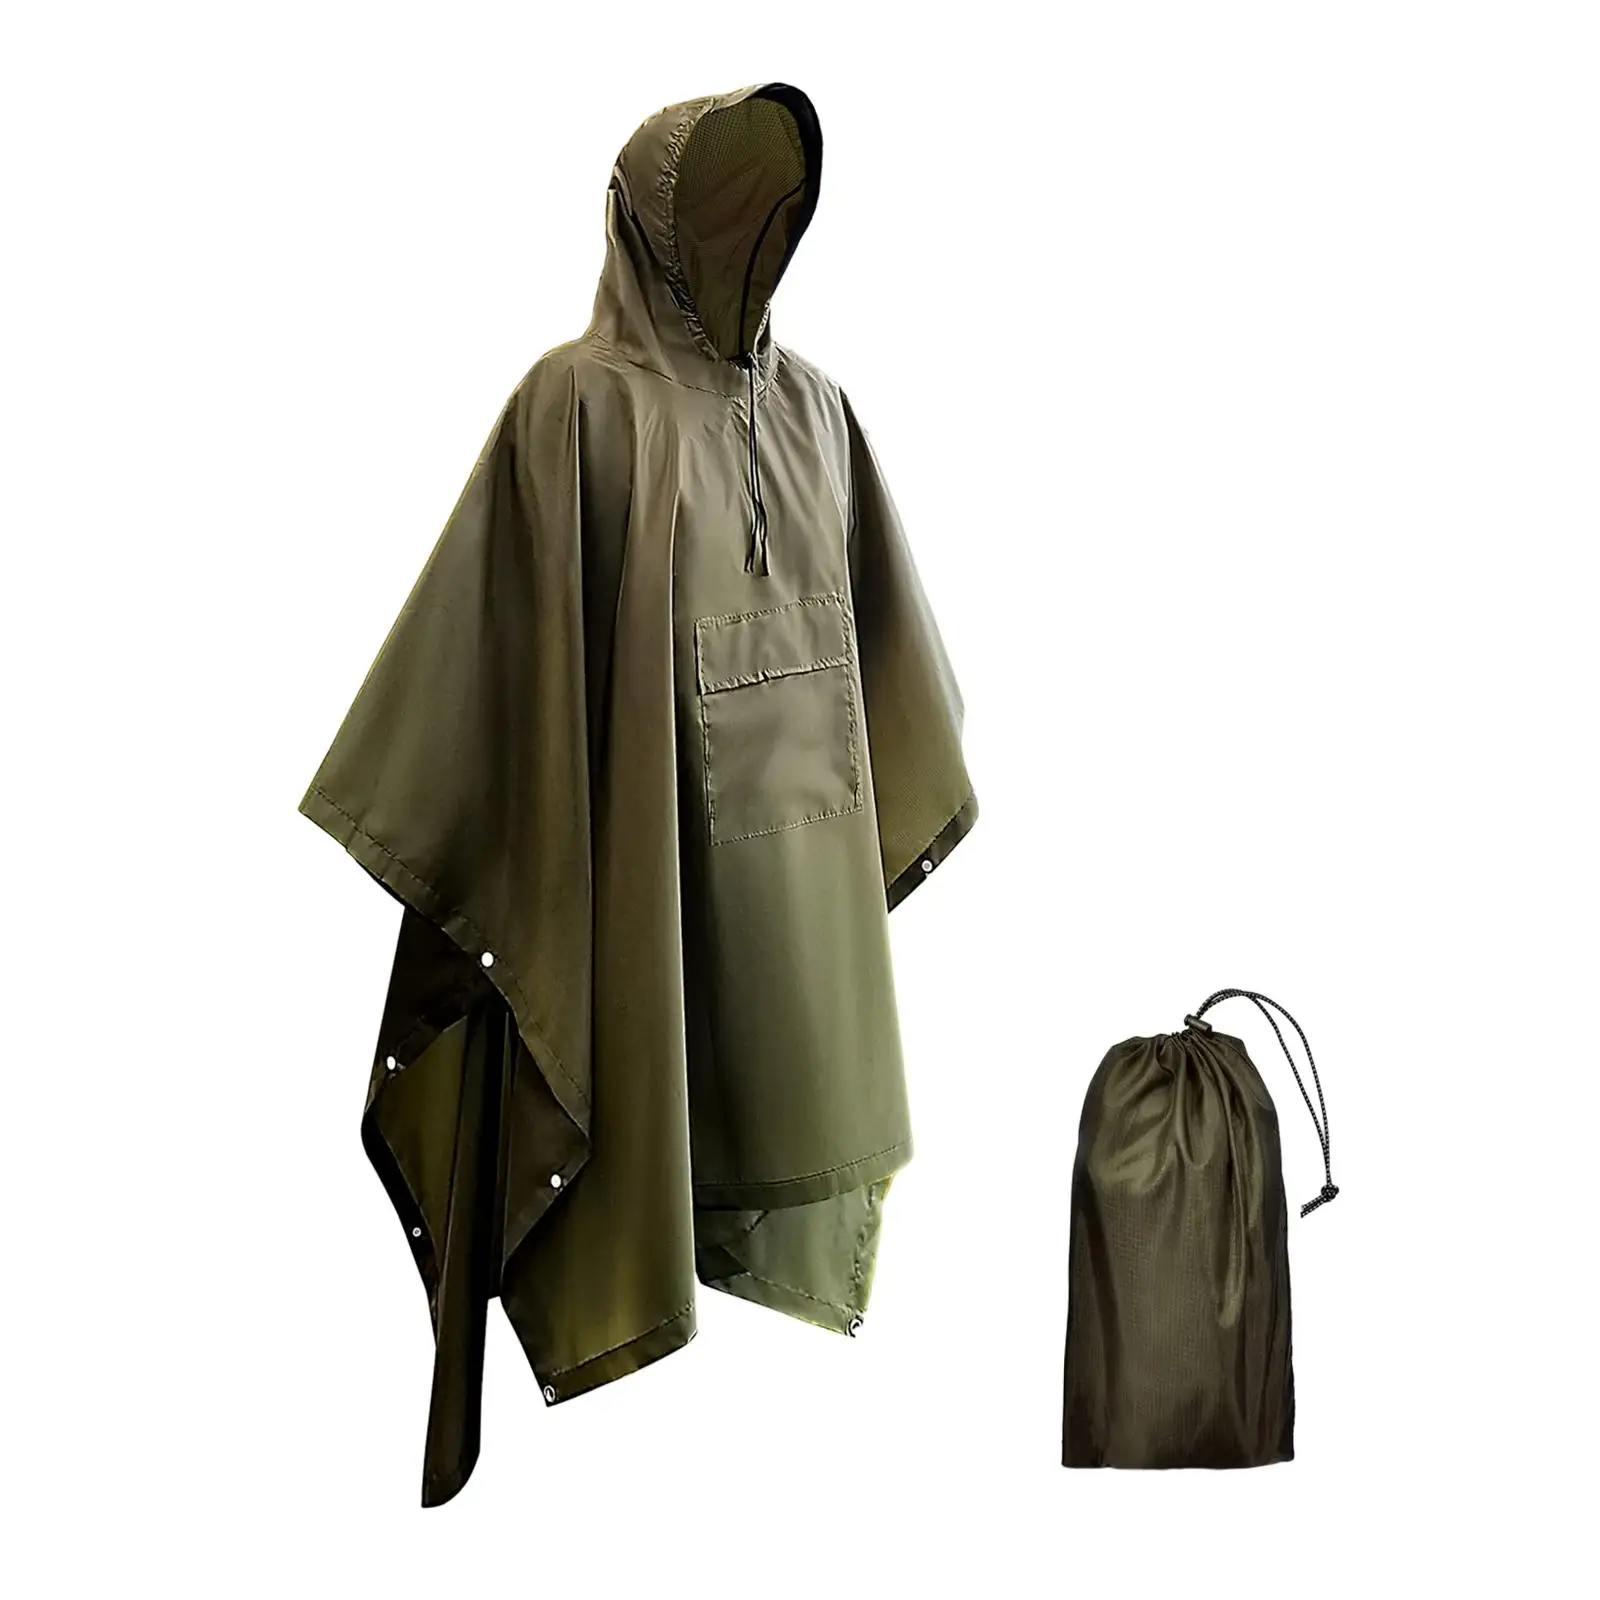 Hooded Rain Poncho for Adult with Pocket, WaterLightweight Unisex Raincoat for Hiking, Camping